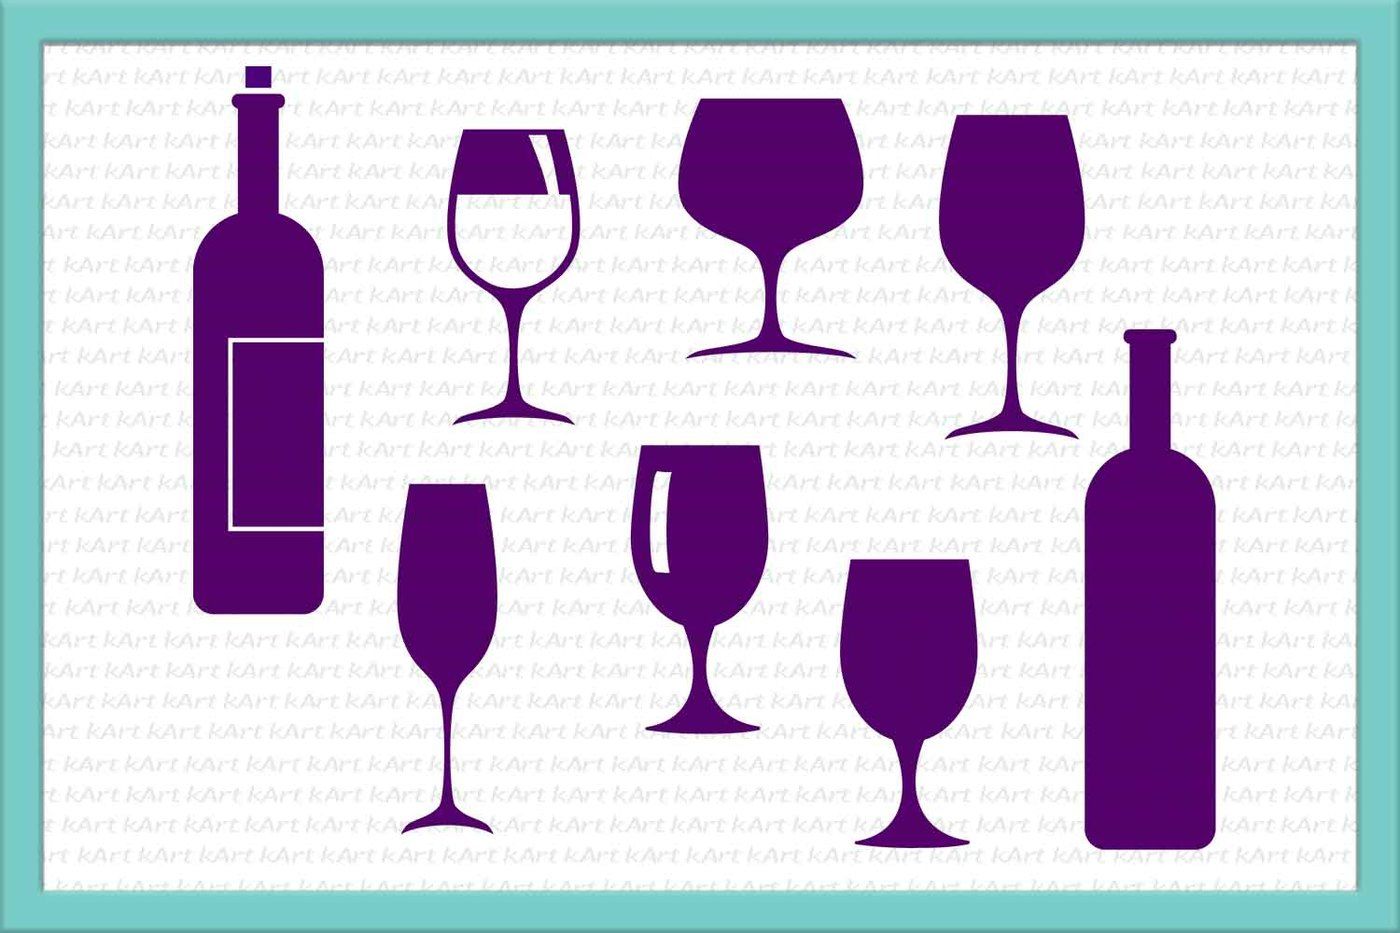 Wine Glass Svg Wine Glasses Svg Wine Glasses Clipart Wine Bottle Svg Wine Glass Silhouette Svg Party Elements Svg Wine Dxf Eps Png By Kartcreation Thehungryjpeg Com